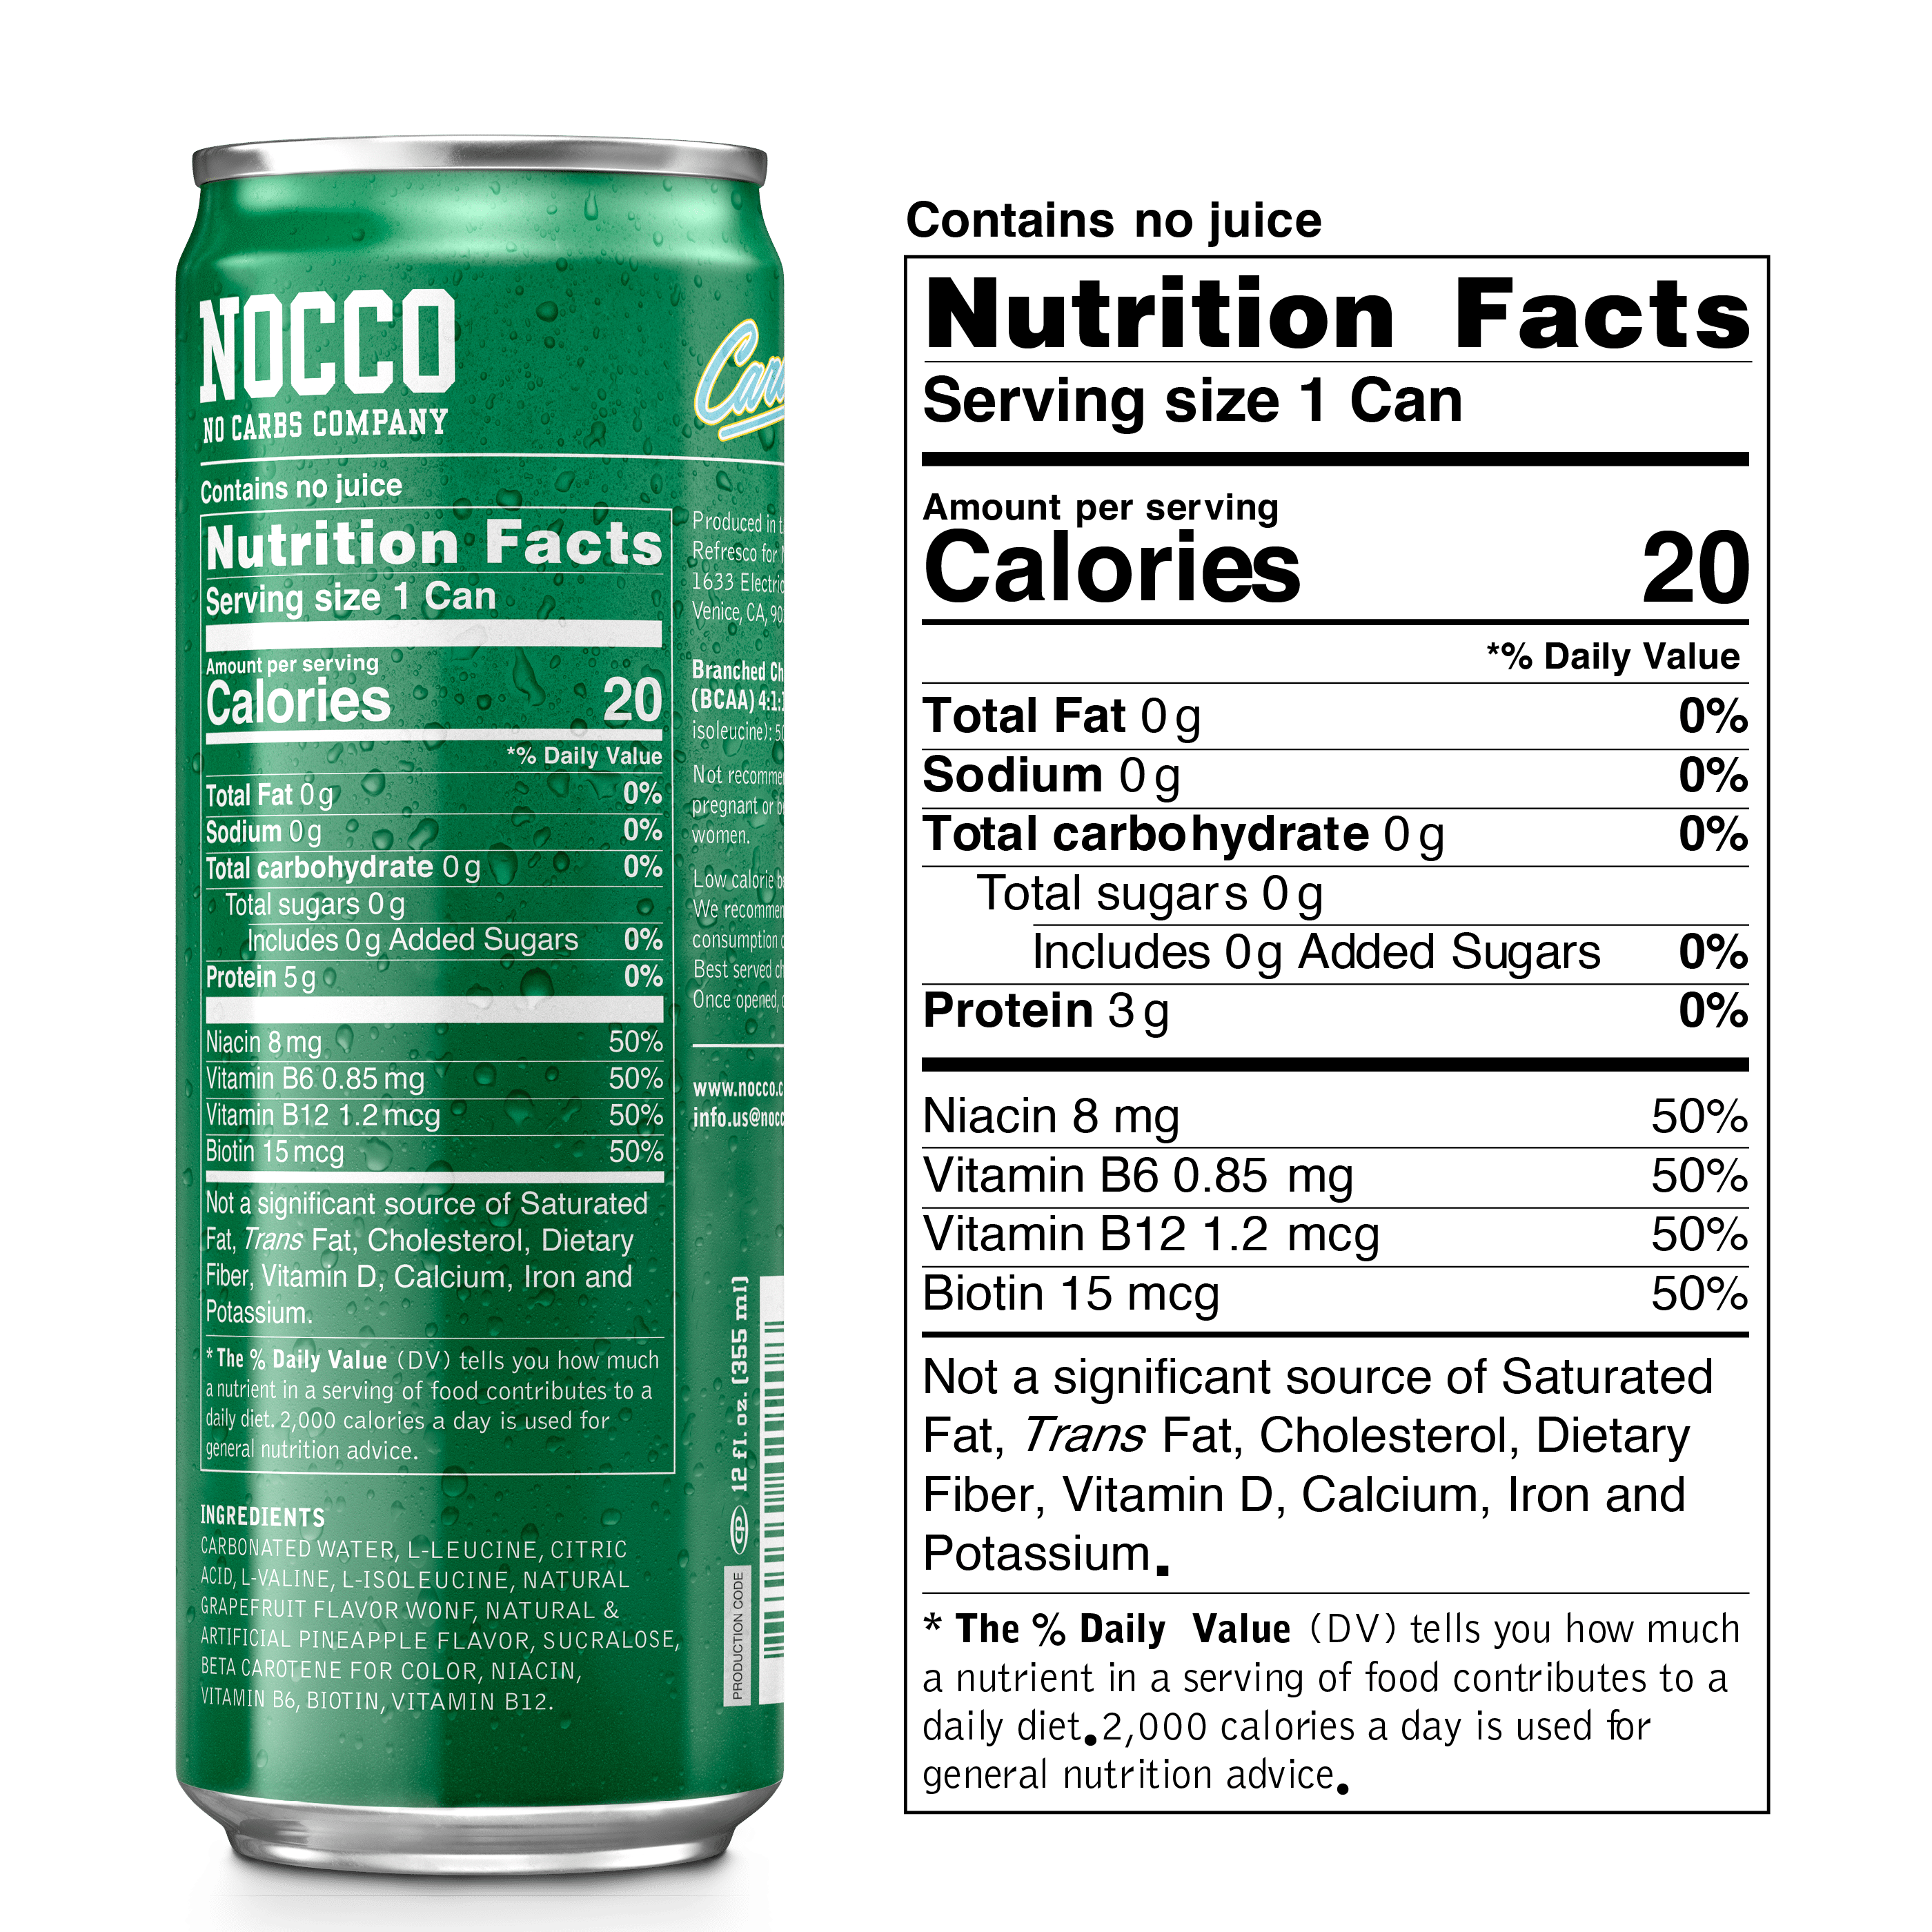 Nocco Caribbean caffeine free nutrition facts